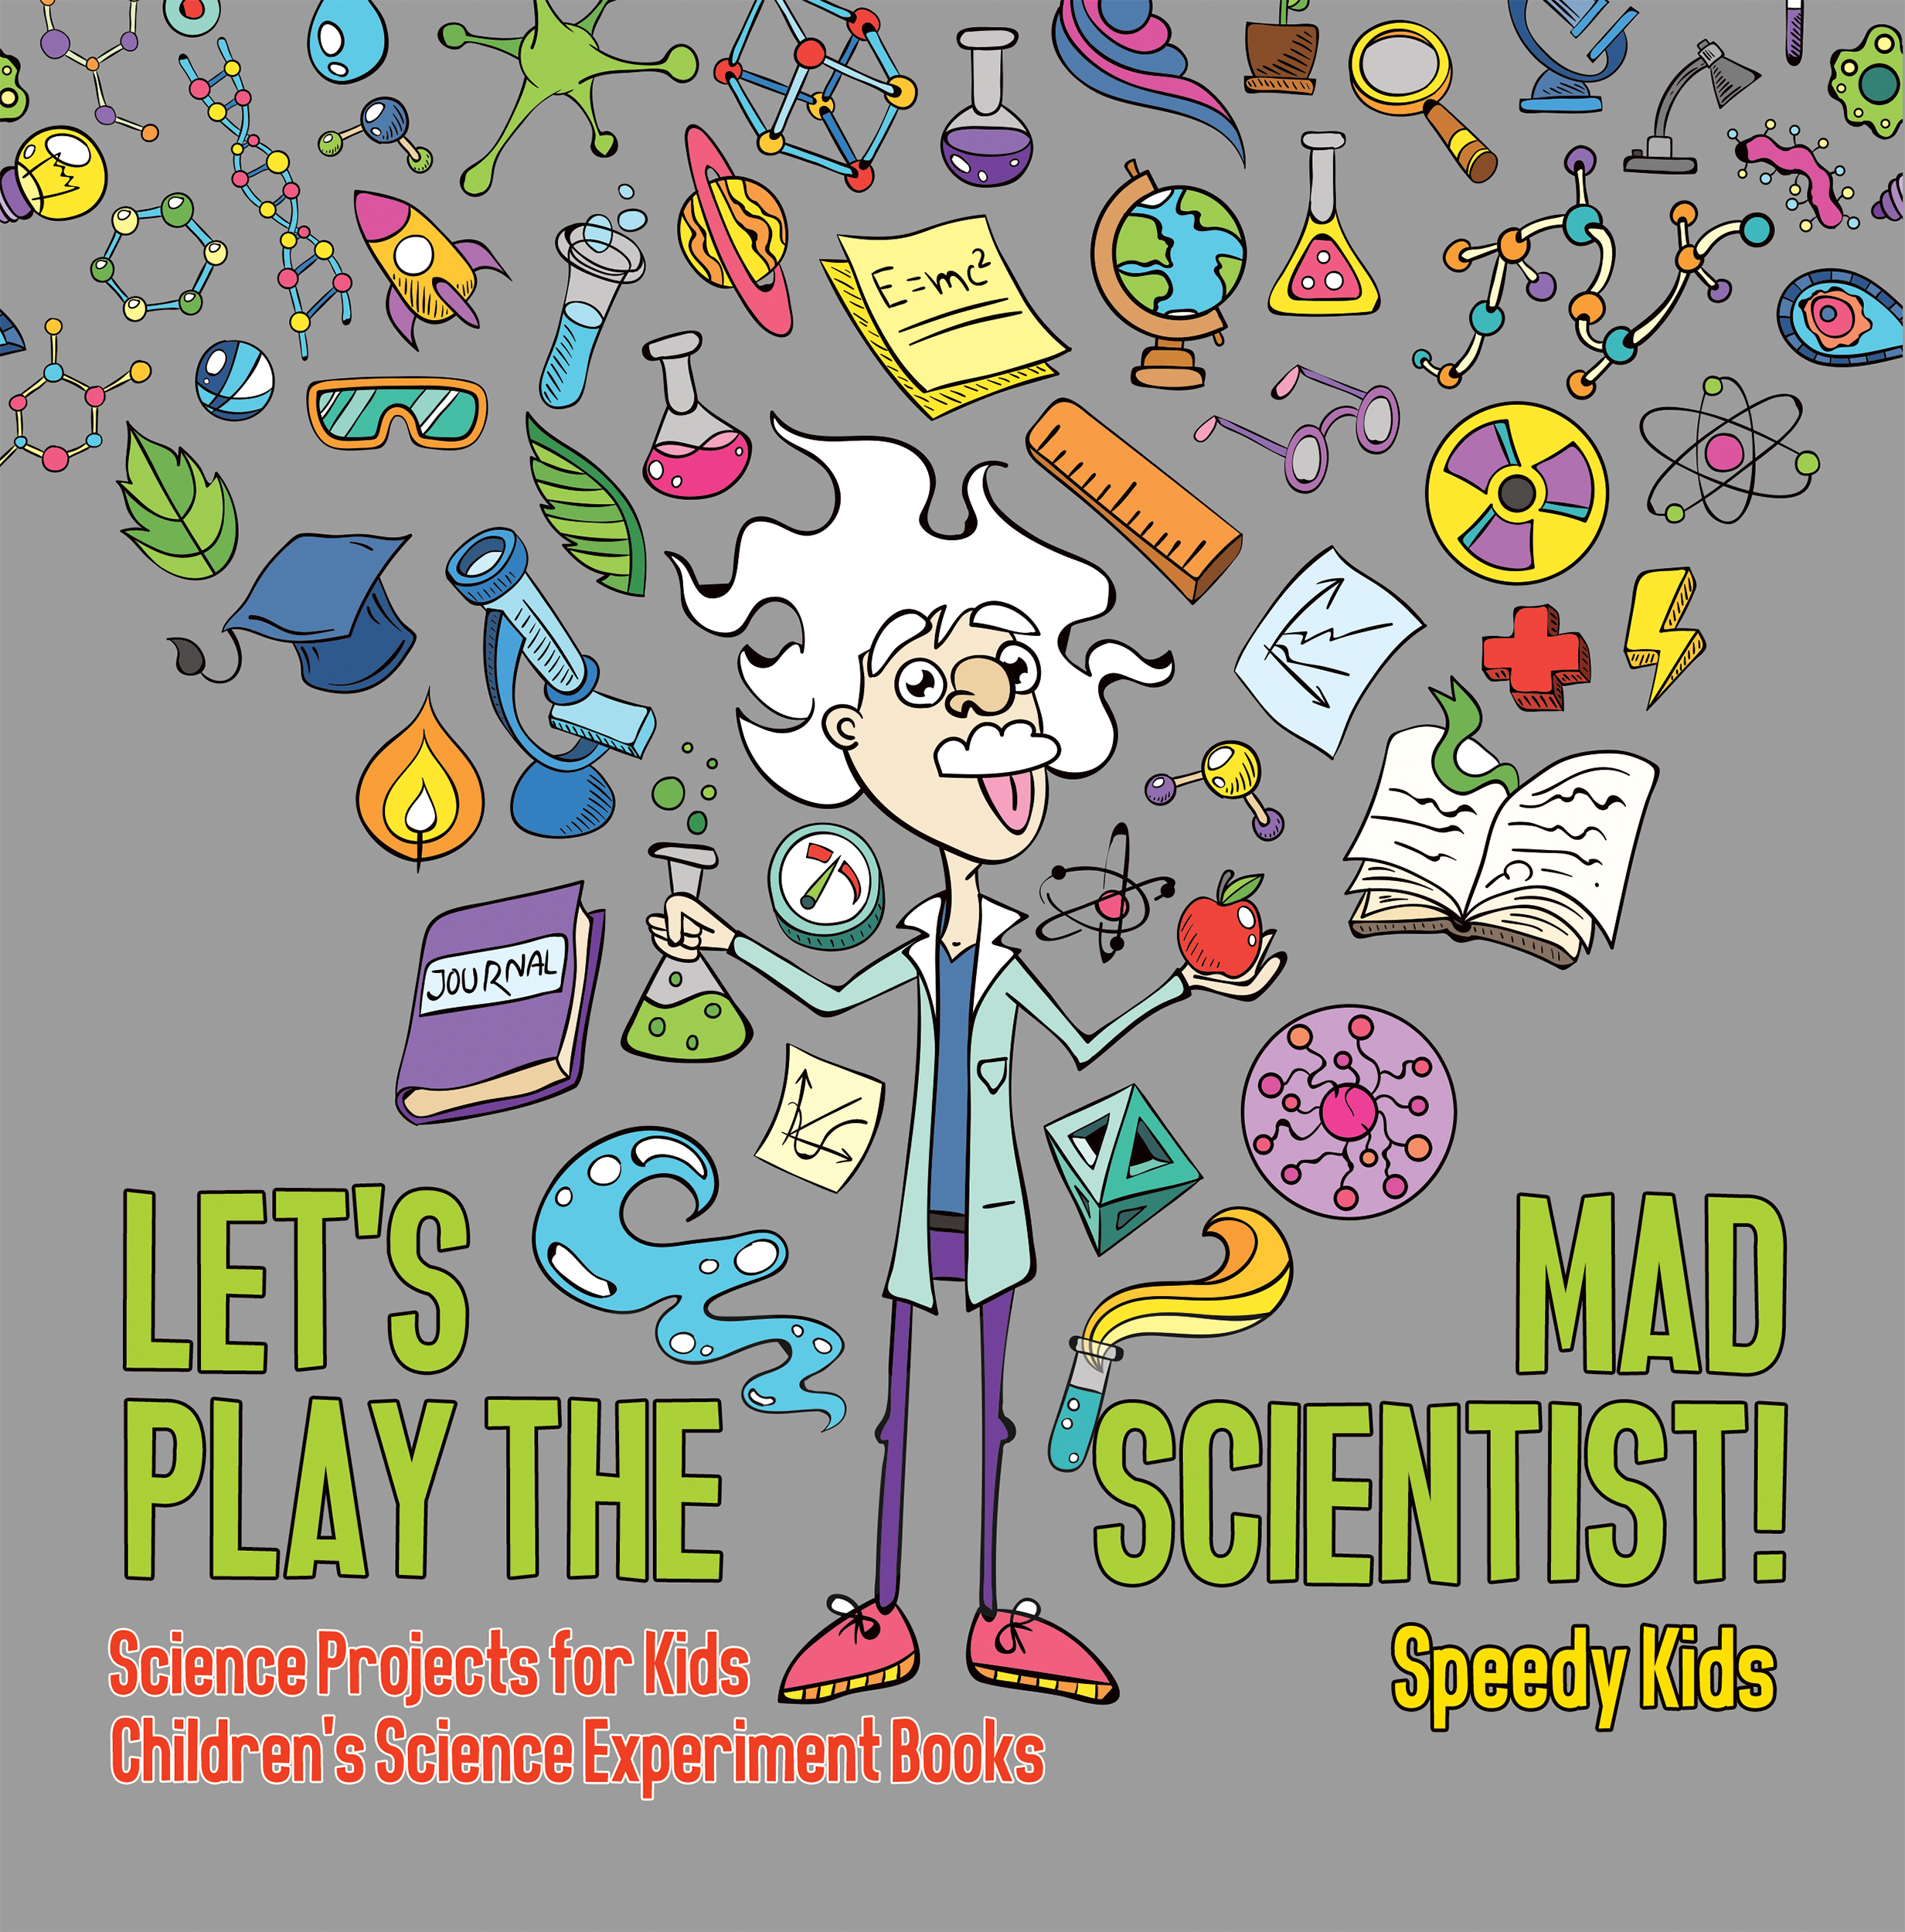 Let's Play the Mad Scientist! | Science Projects for Kids | Children's Science Experiment Books by Speedy Kids